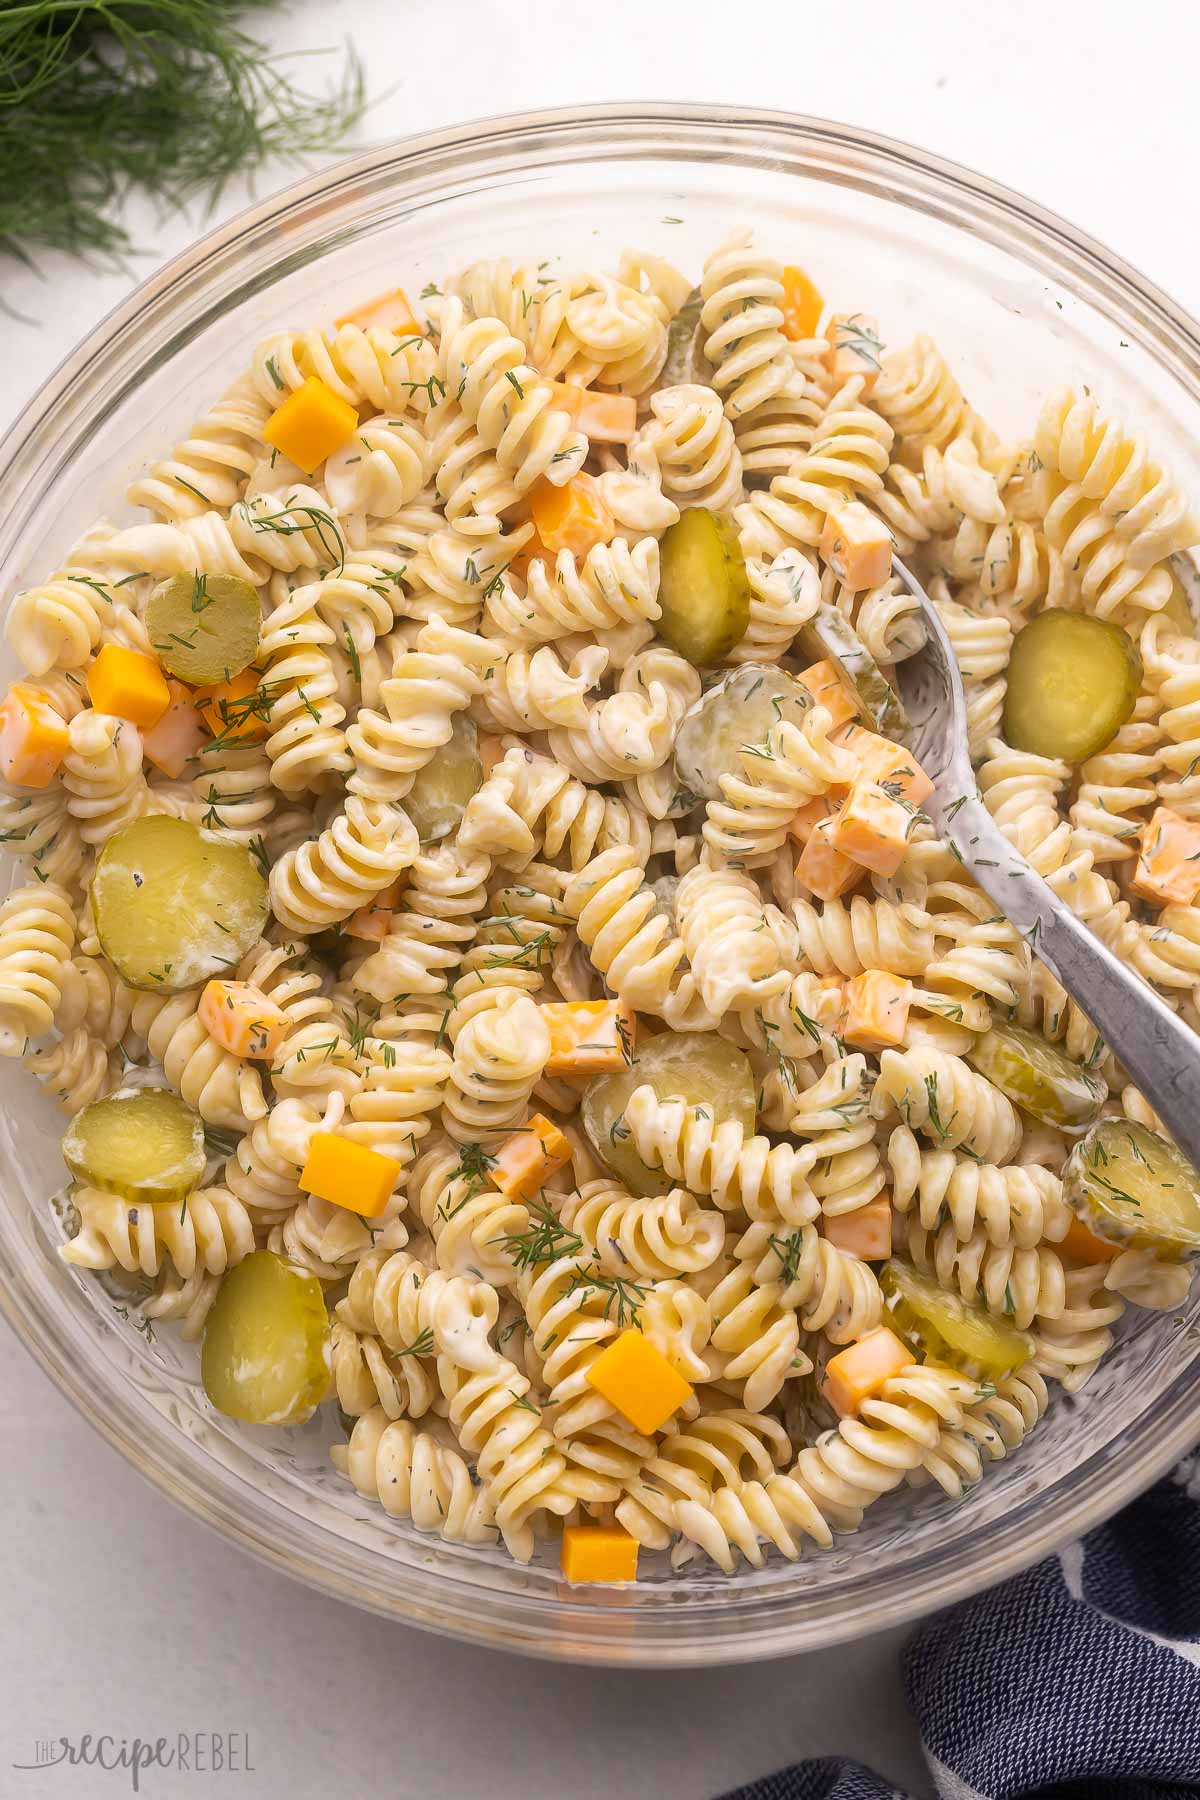 large glass bowl filled with dill pickle pasta salad and spoon.